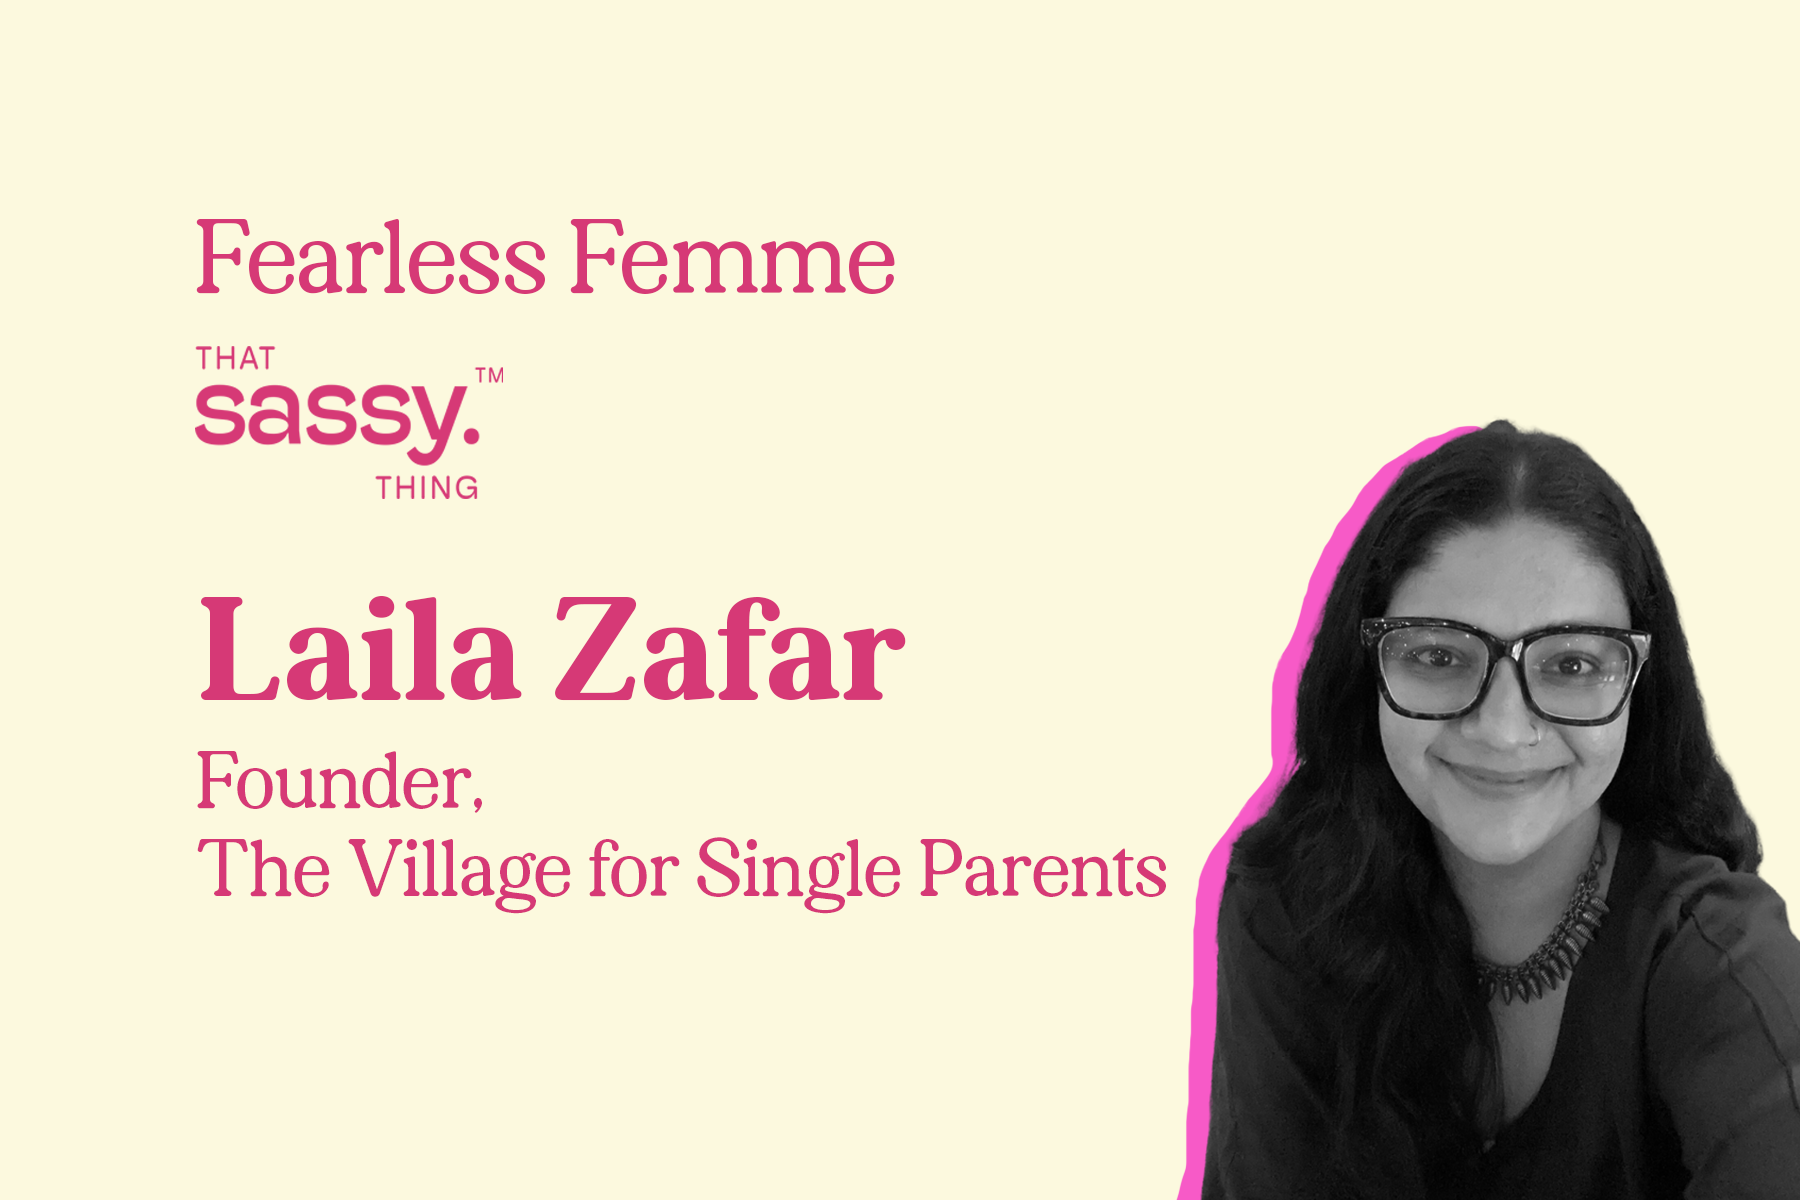 Laila Zafar on Being a Single Mother in India